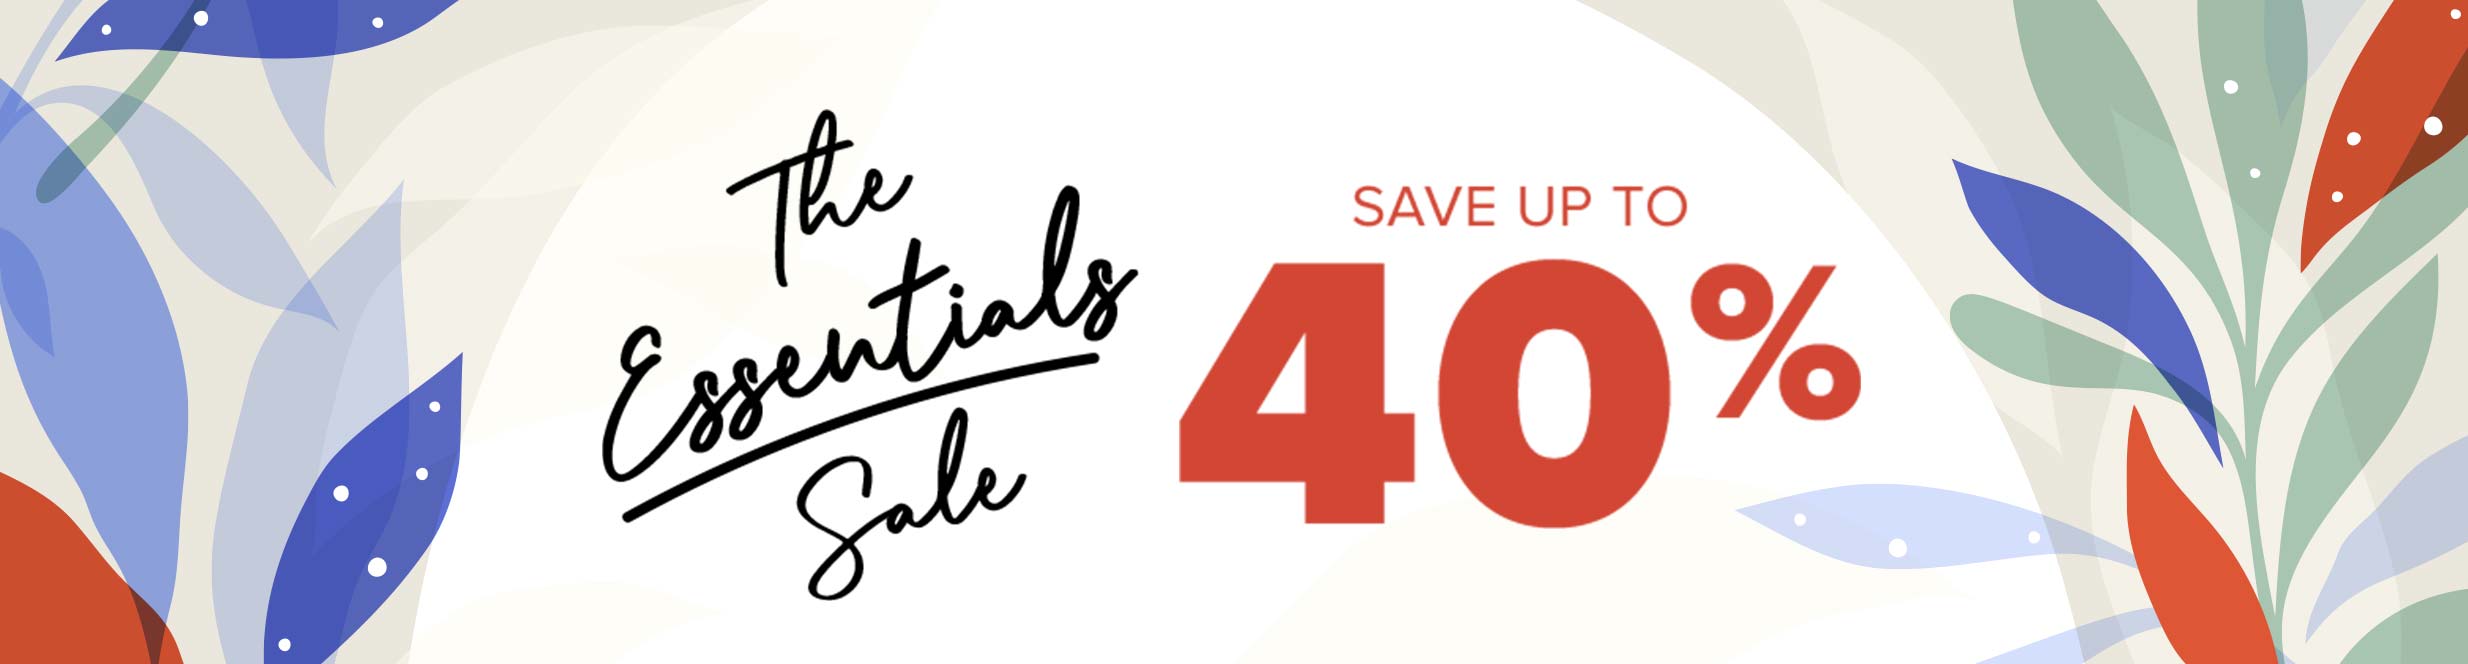 The Essentials Sale, Save up to 40%